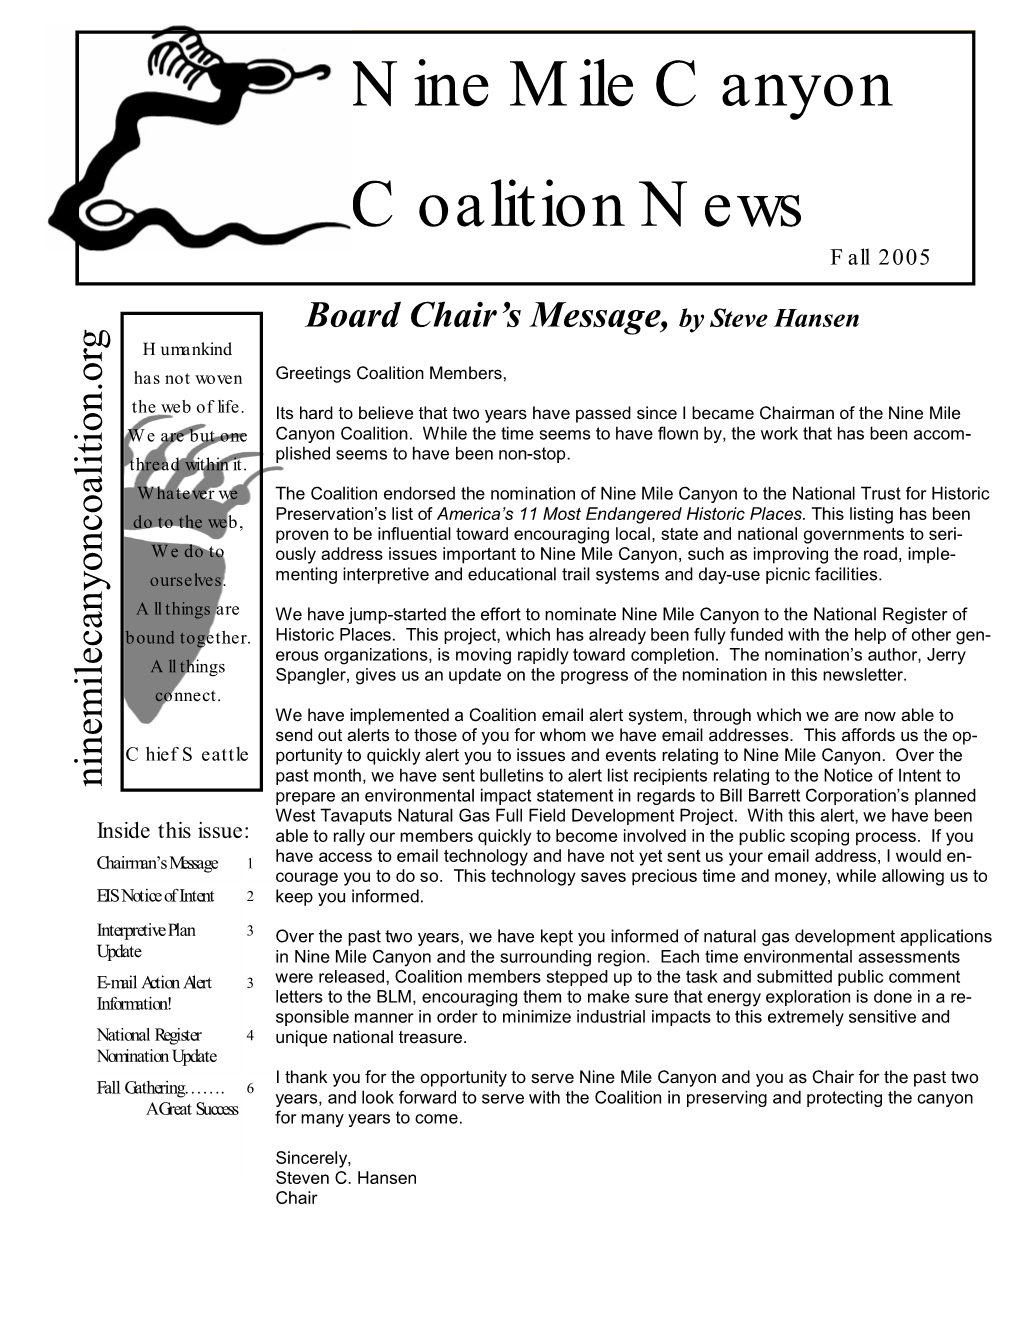 Nine Mile Canyon Coalition News Fall 2005 Board Chair’S Message, by Steve Hansen Humankind Greetings Coalition Members, Has Not Woven the Web of Life